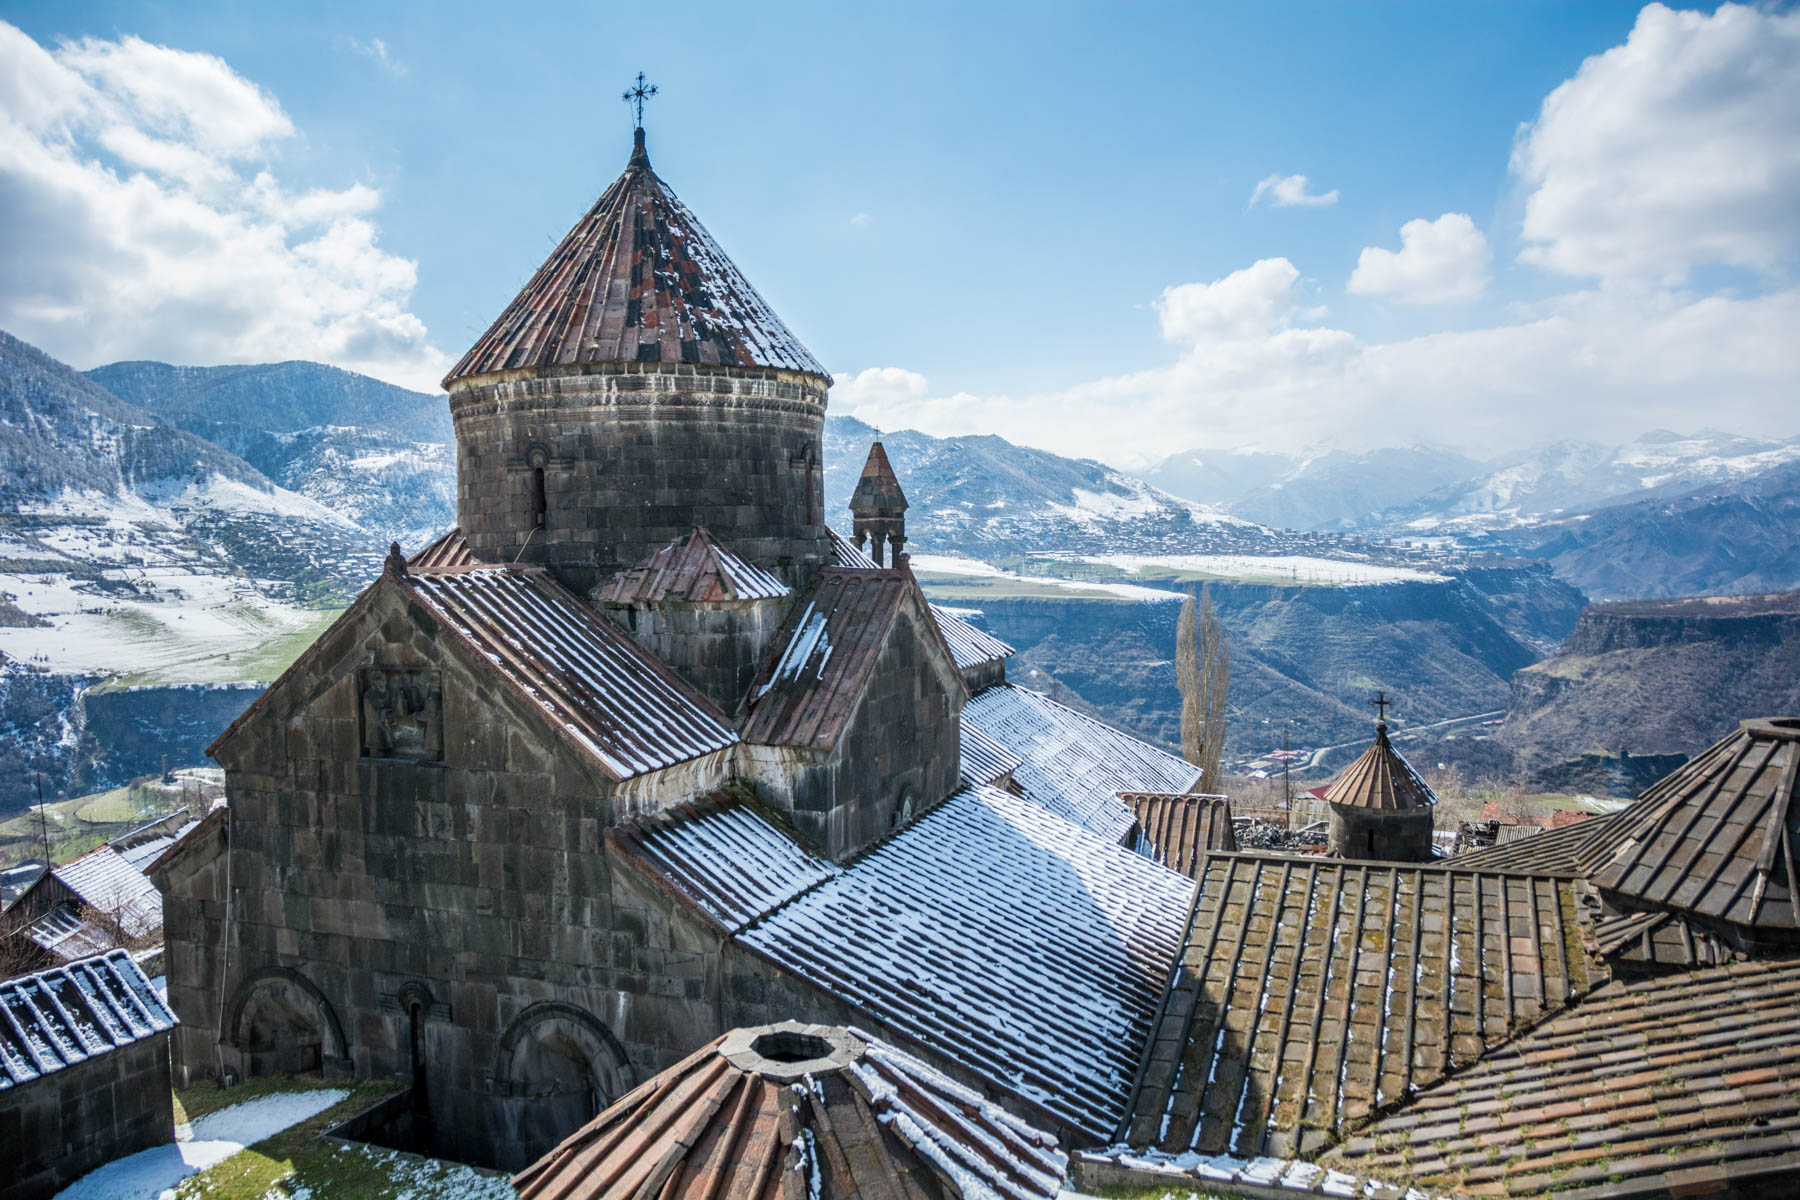 Why visit Armenia: The view from the bell tower of Haghpat monastery in Alaverdi, Armenia.